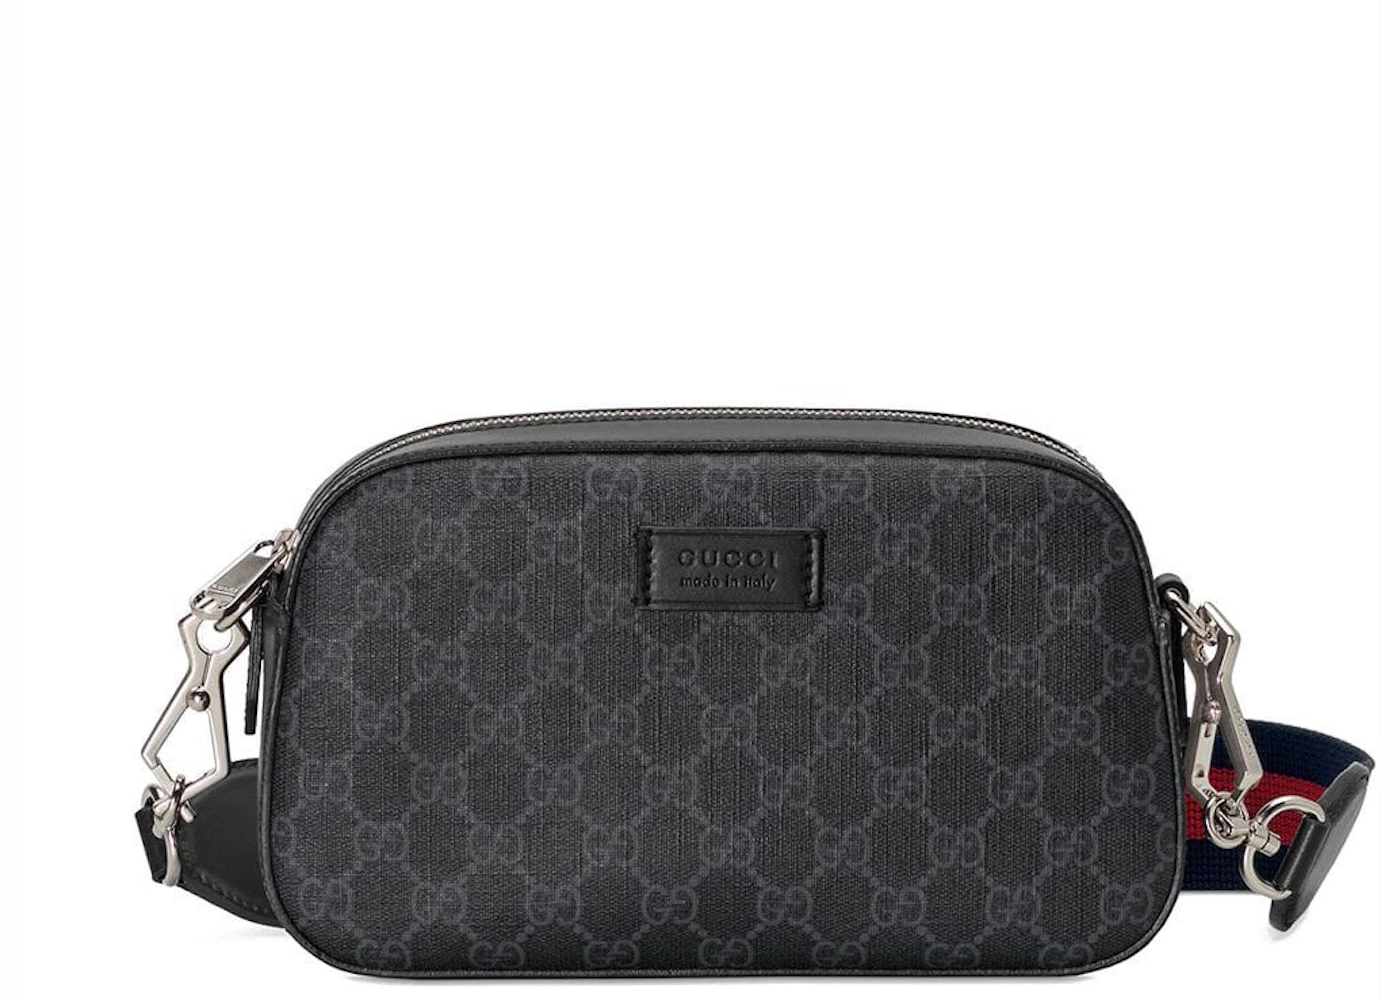 Gucci Shoulder Bag GG Supreme Small Black/Grey in Canvas/Leather with ...